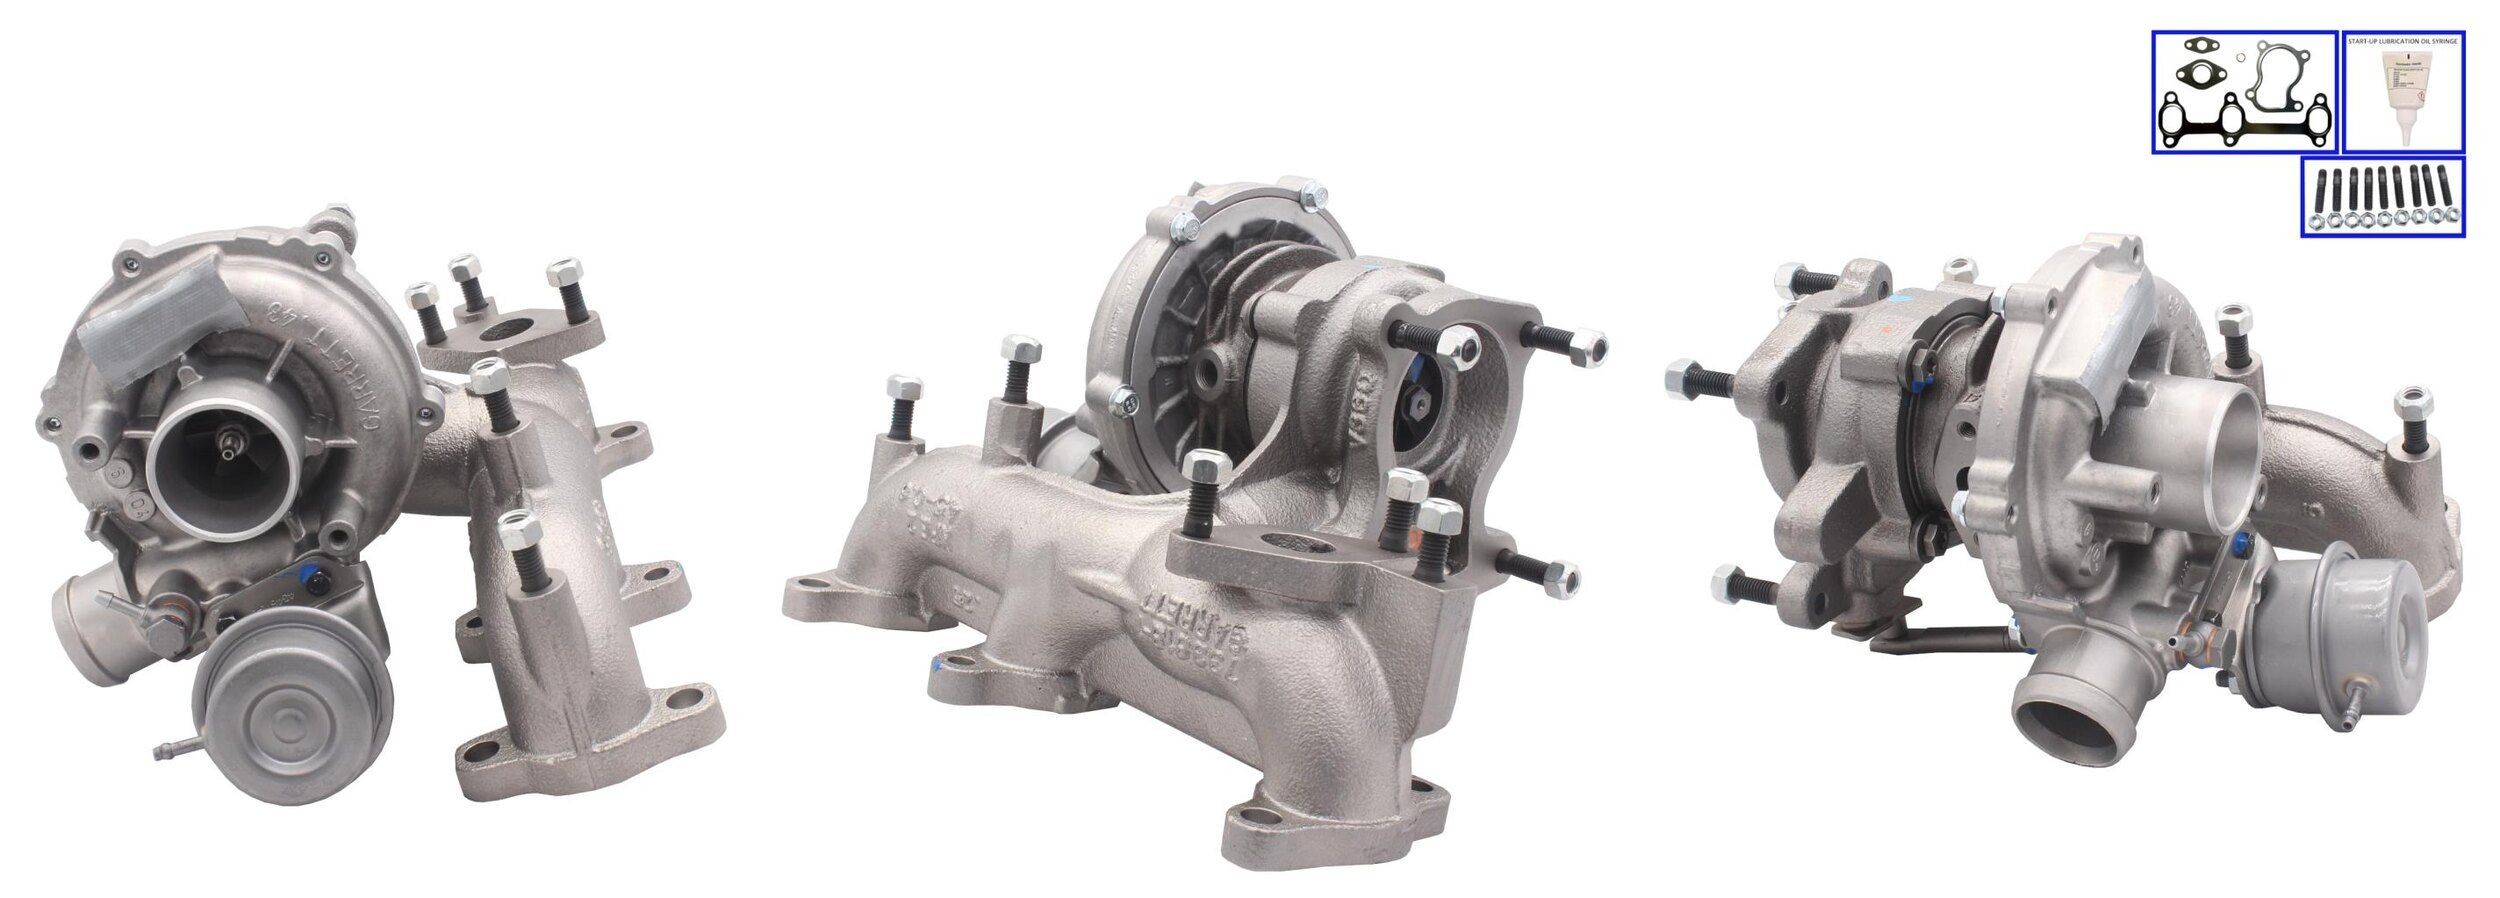 ELSTOCK Exhaust Turbocharger, Pneumatically controlled actuator, with gaskets/seals Turbo 91-1763 buy